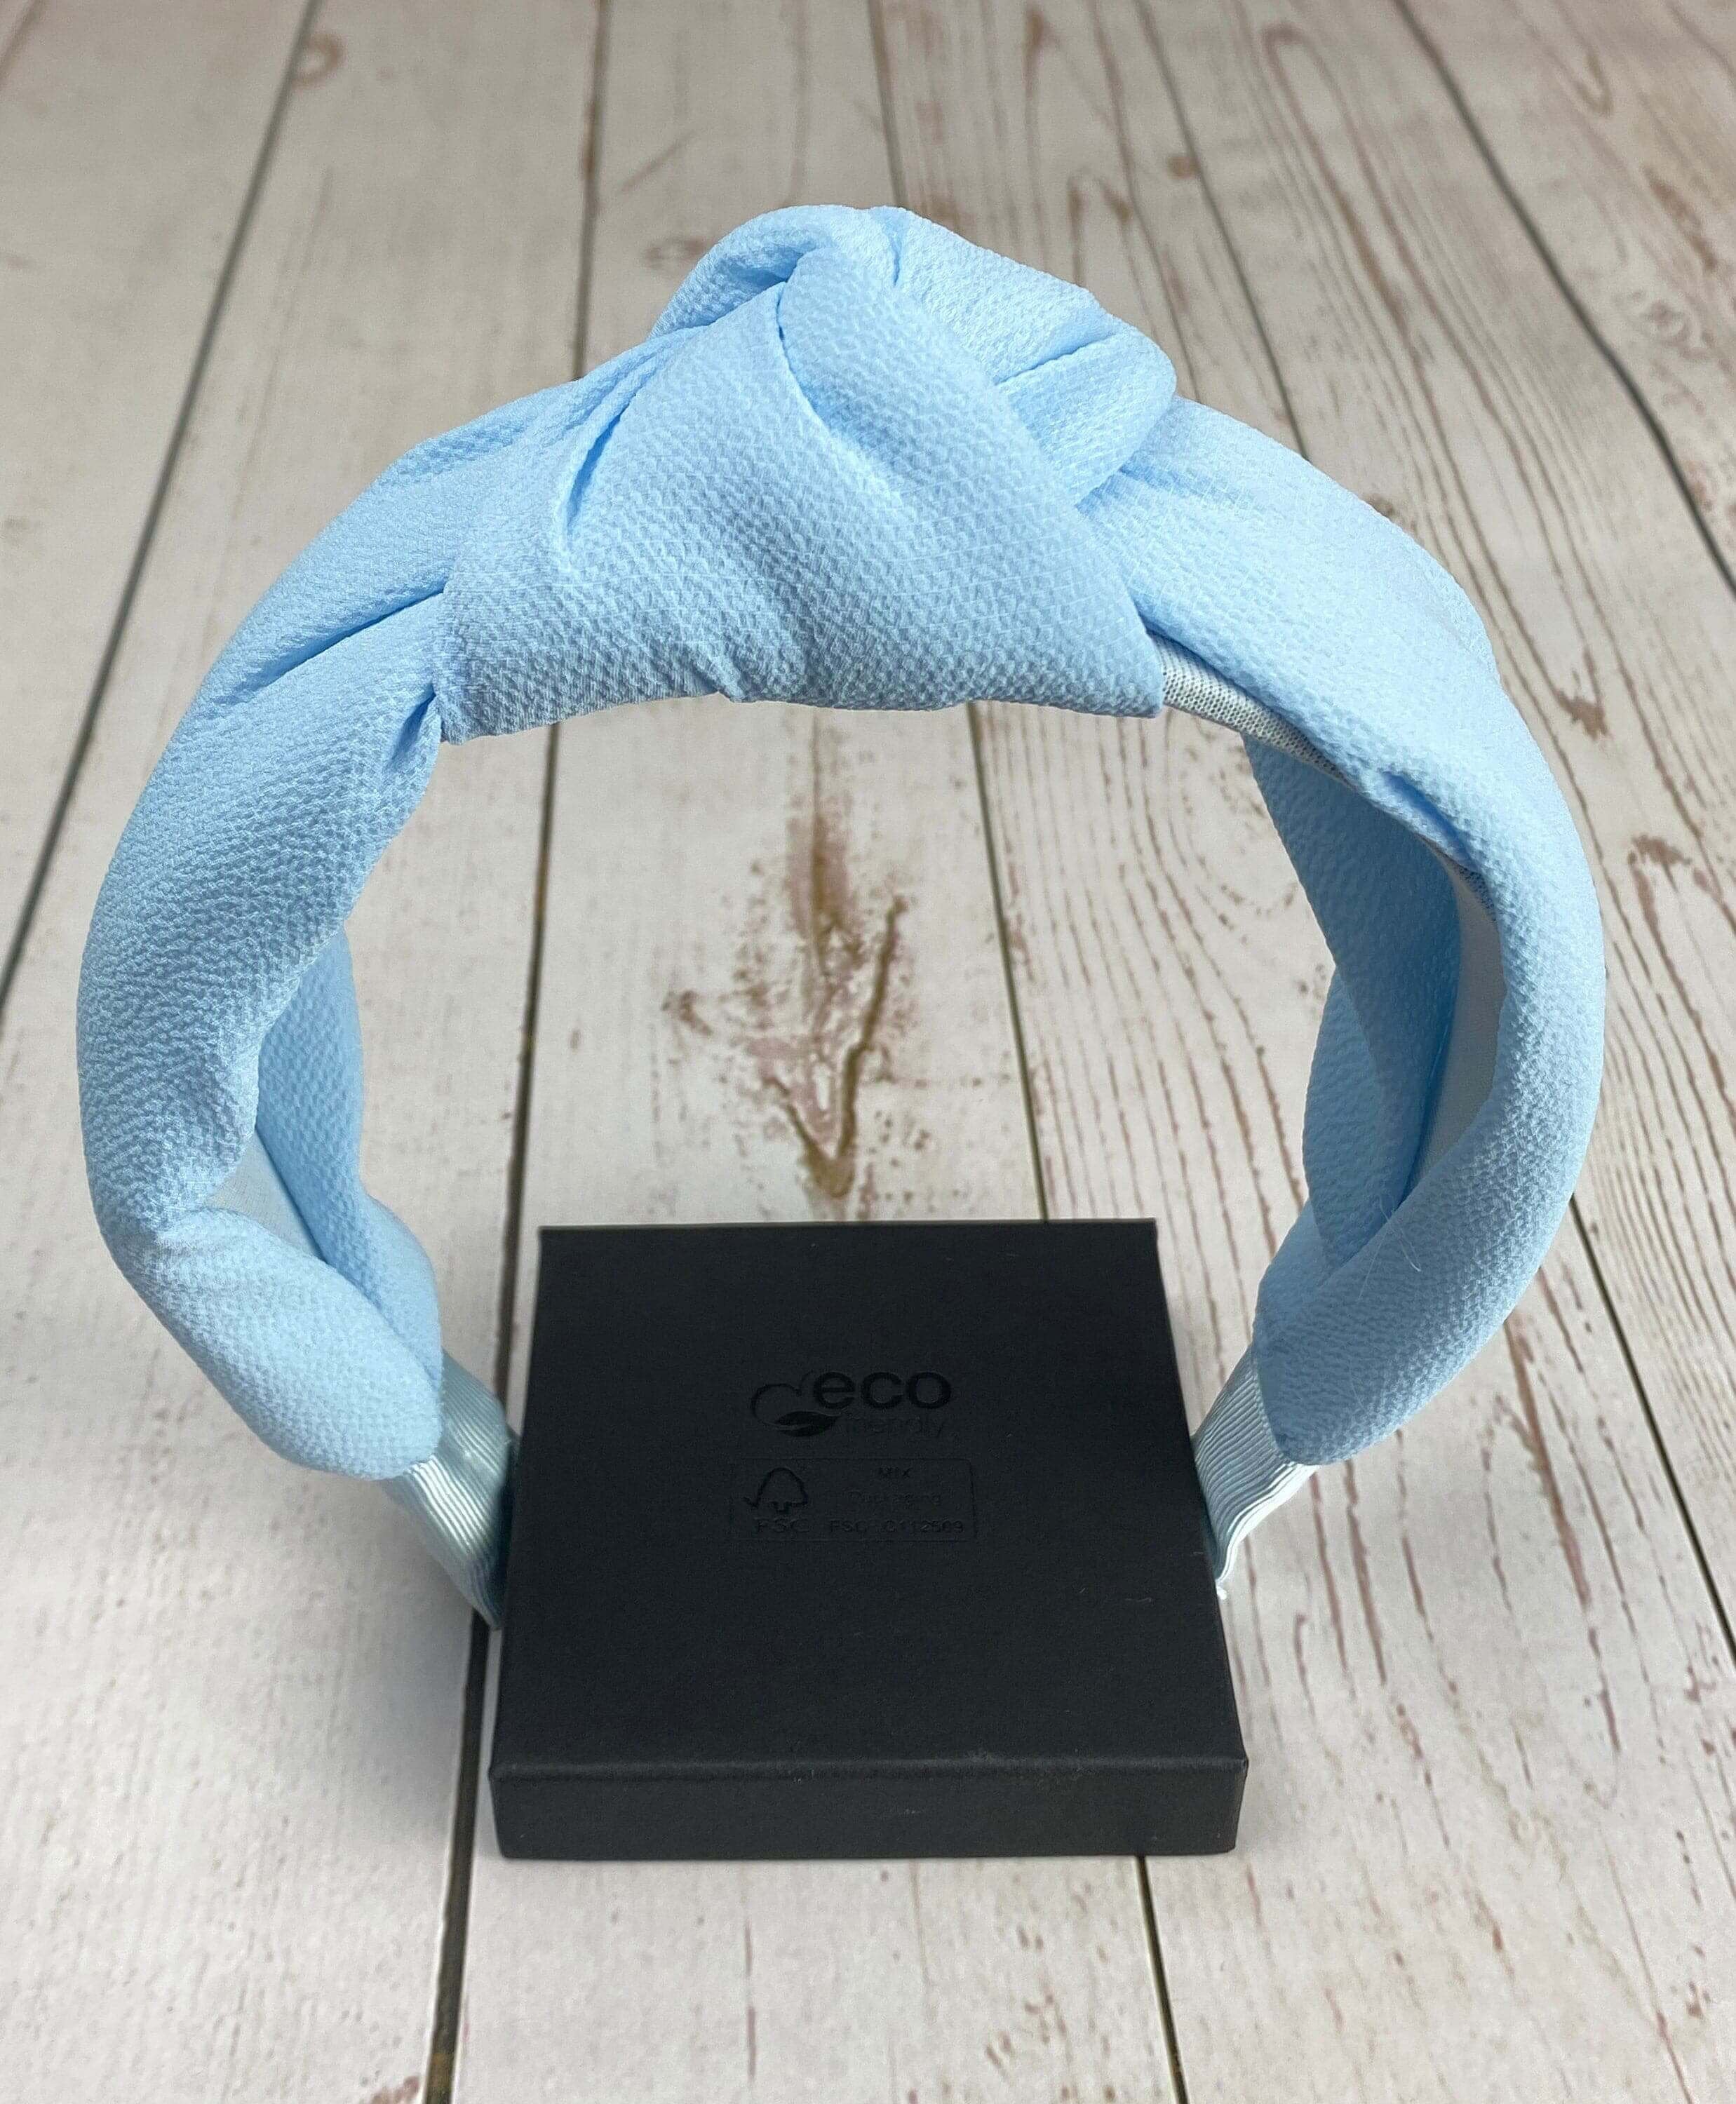 Elevate your hairstyle with this fashionable light blue headband, designed with a twist knot and padded for ultimate comfort.